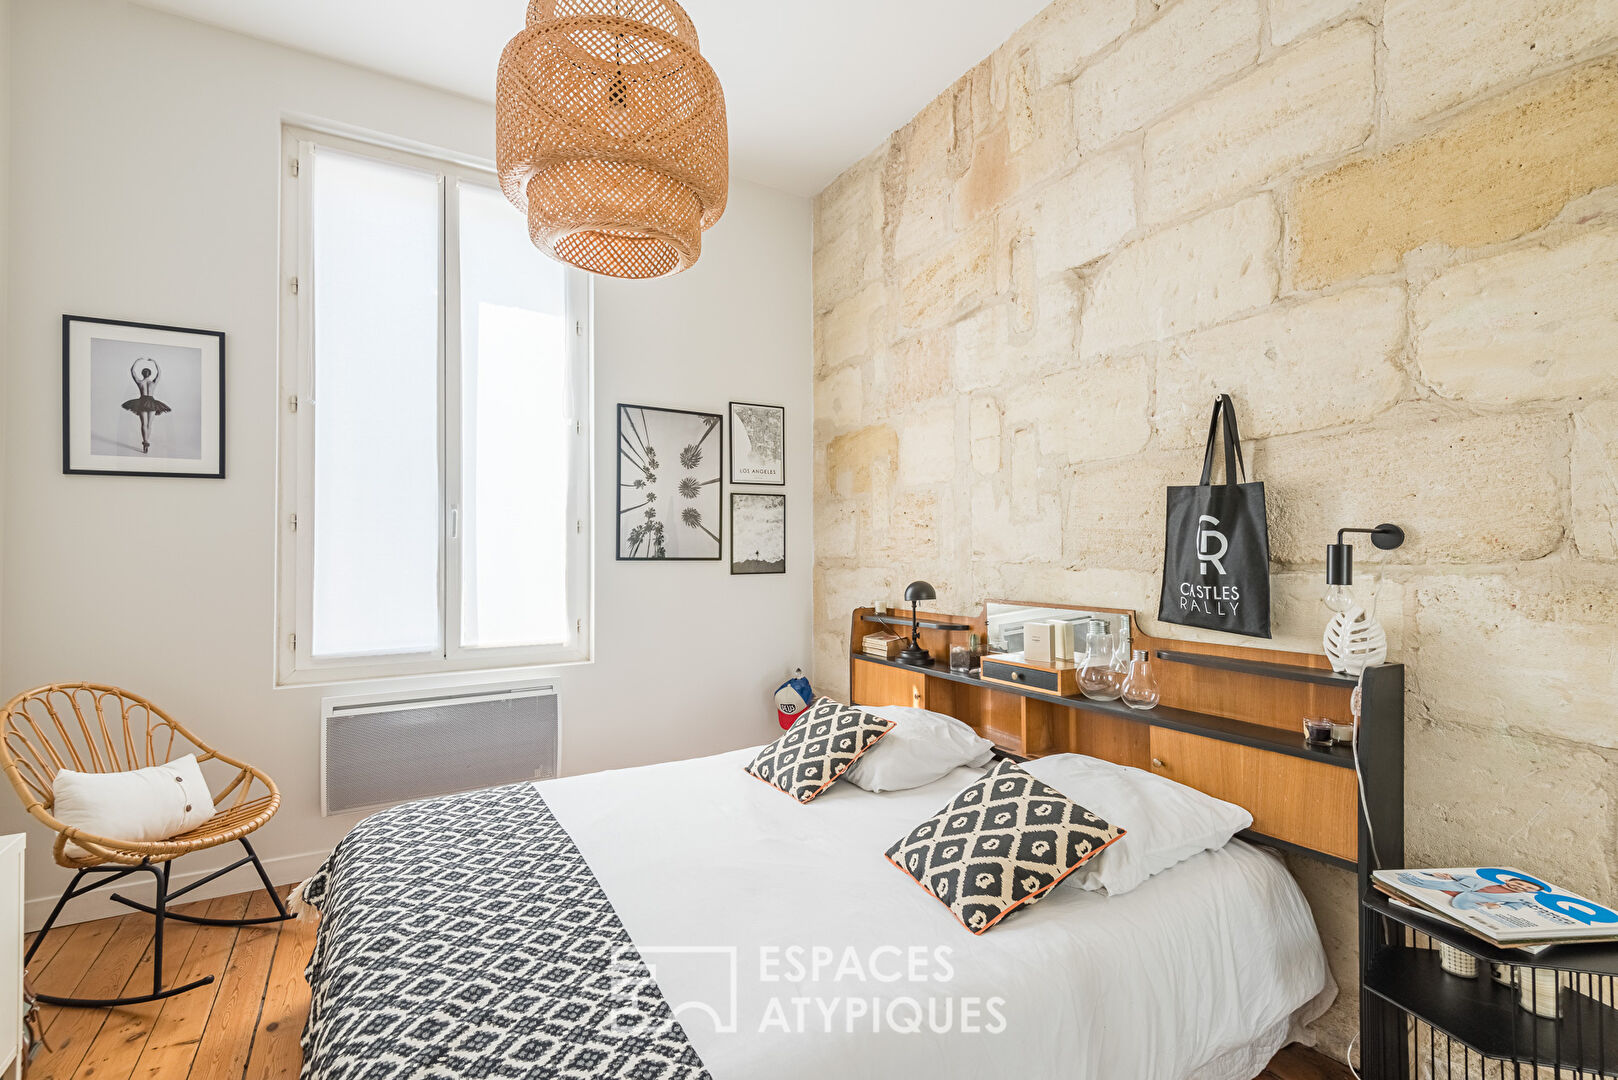 The house that looks like an Artist’s studio in Les Chartrons